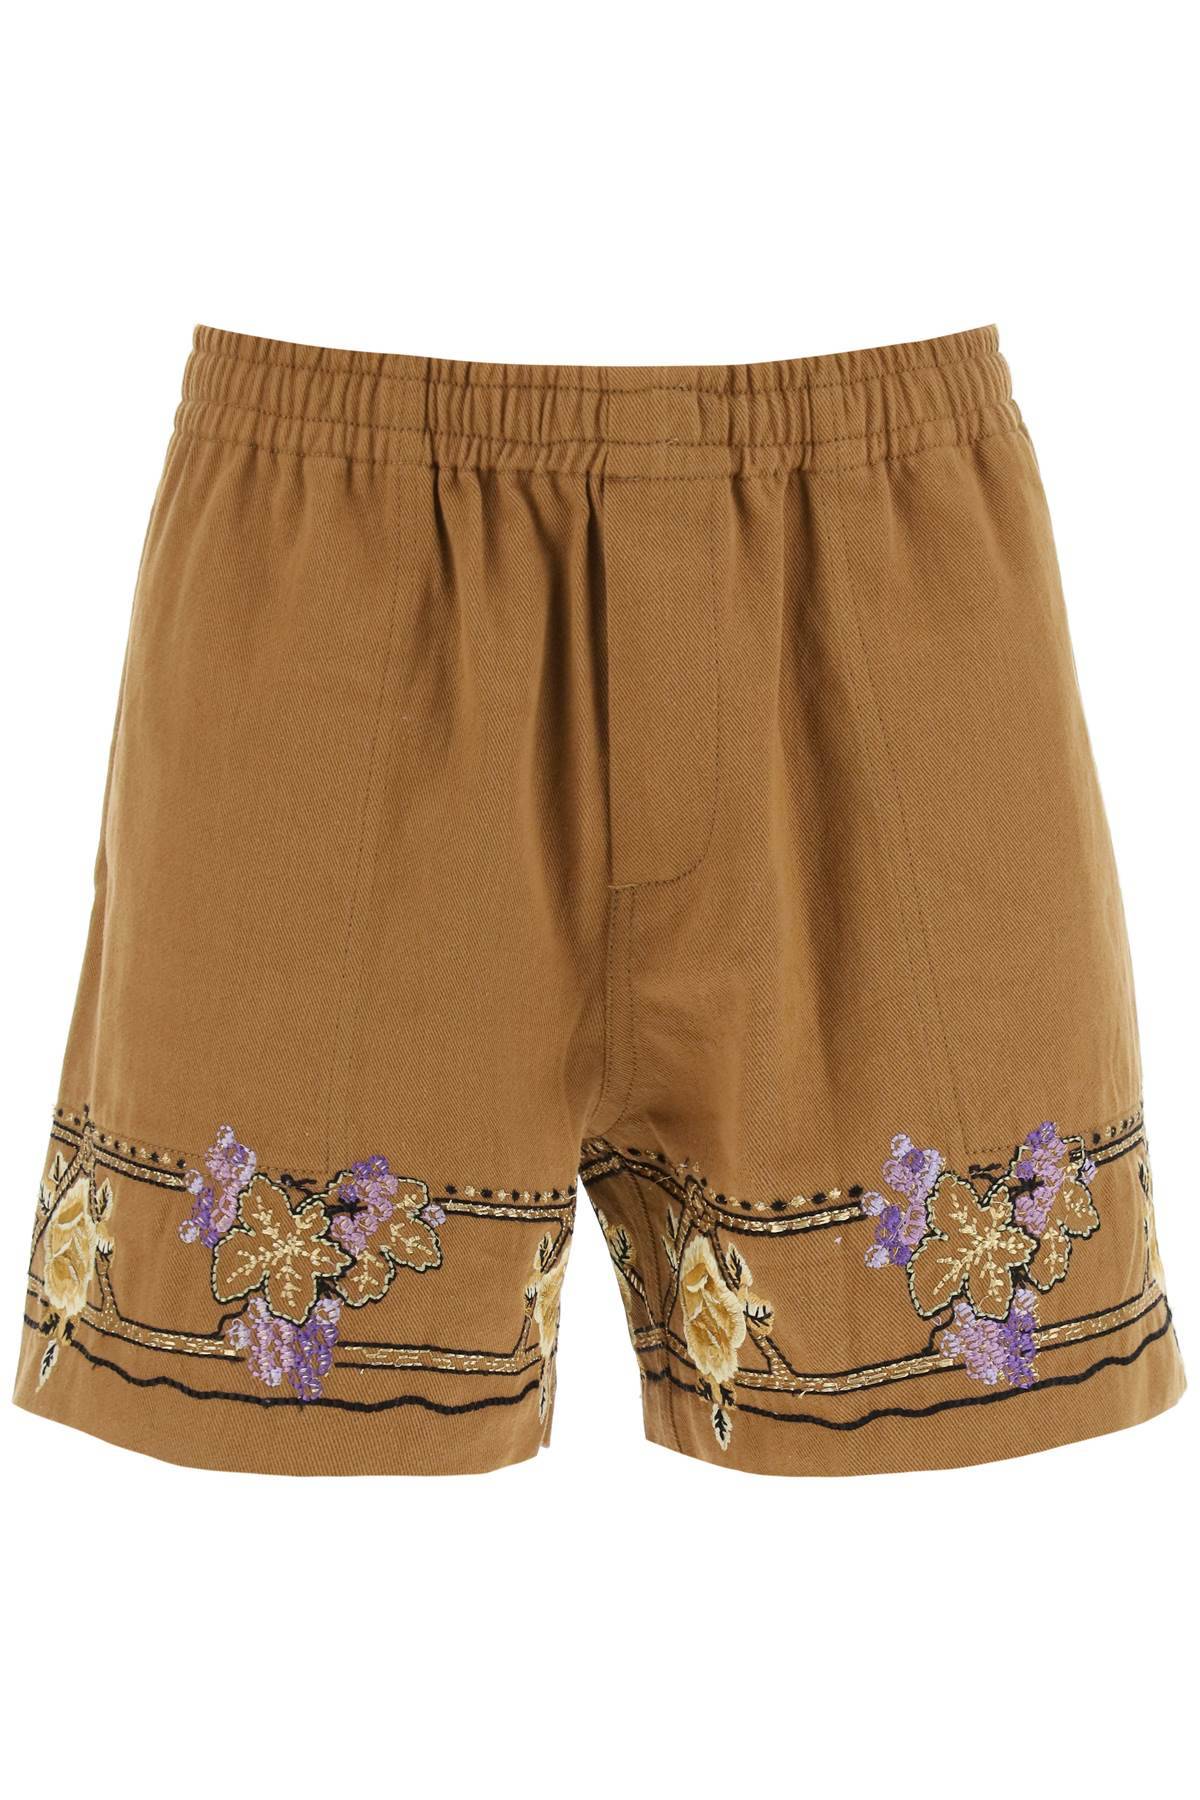 BODE BODE autumn royal shorts with floral embroideries